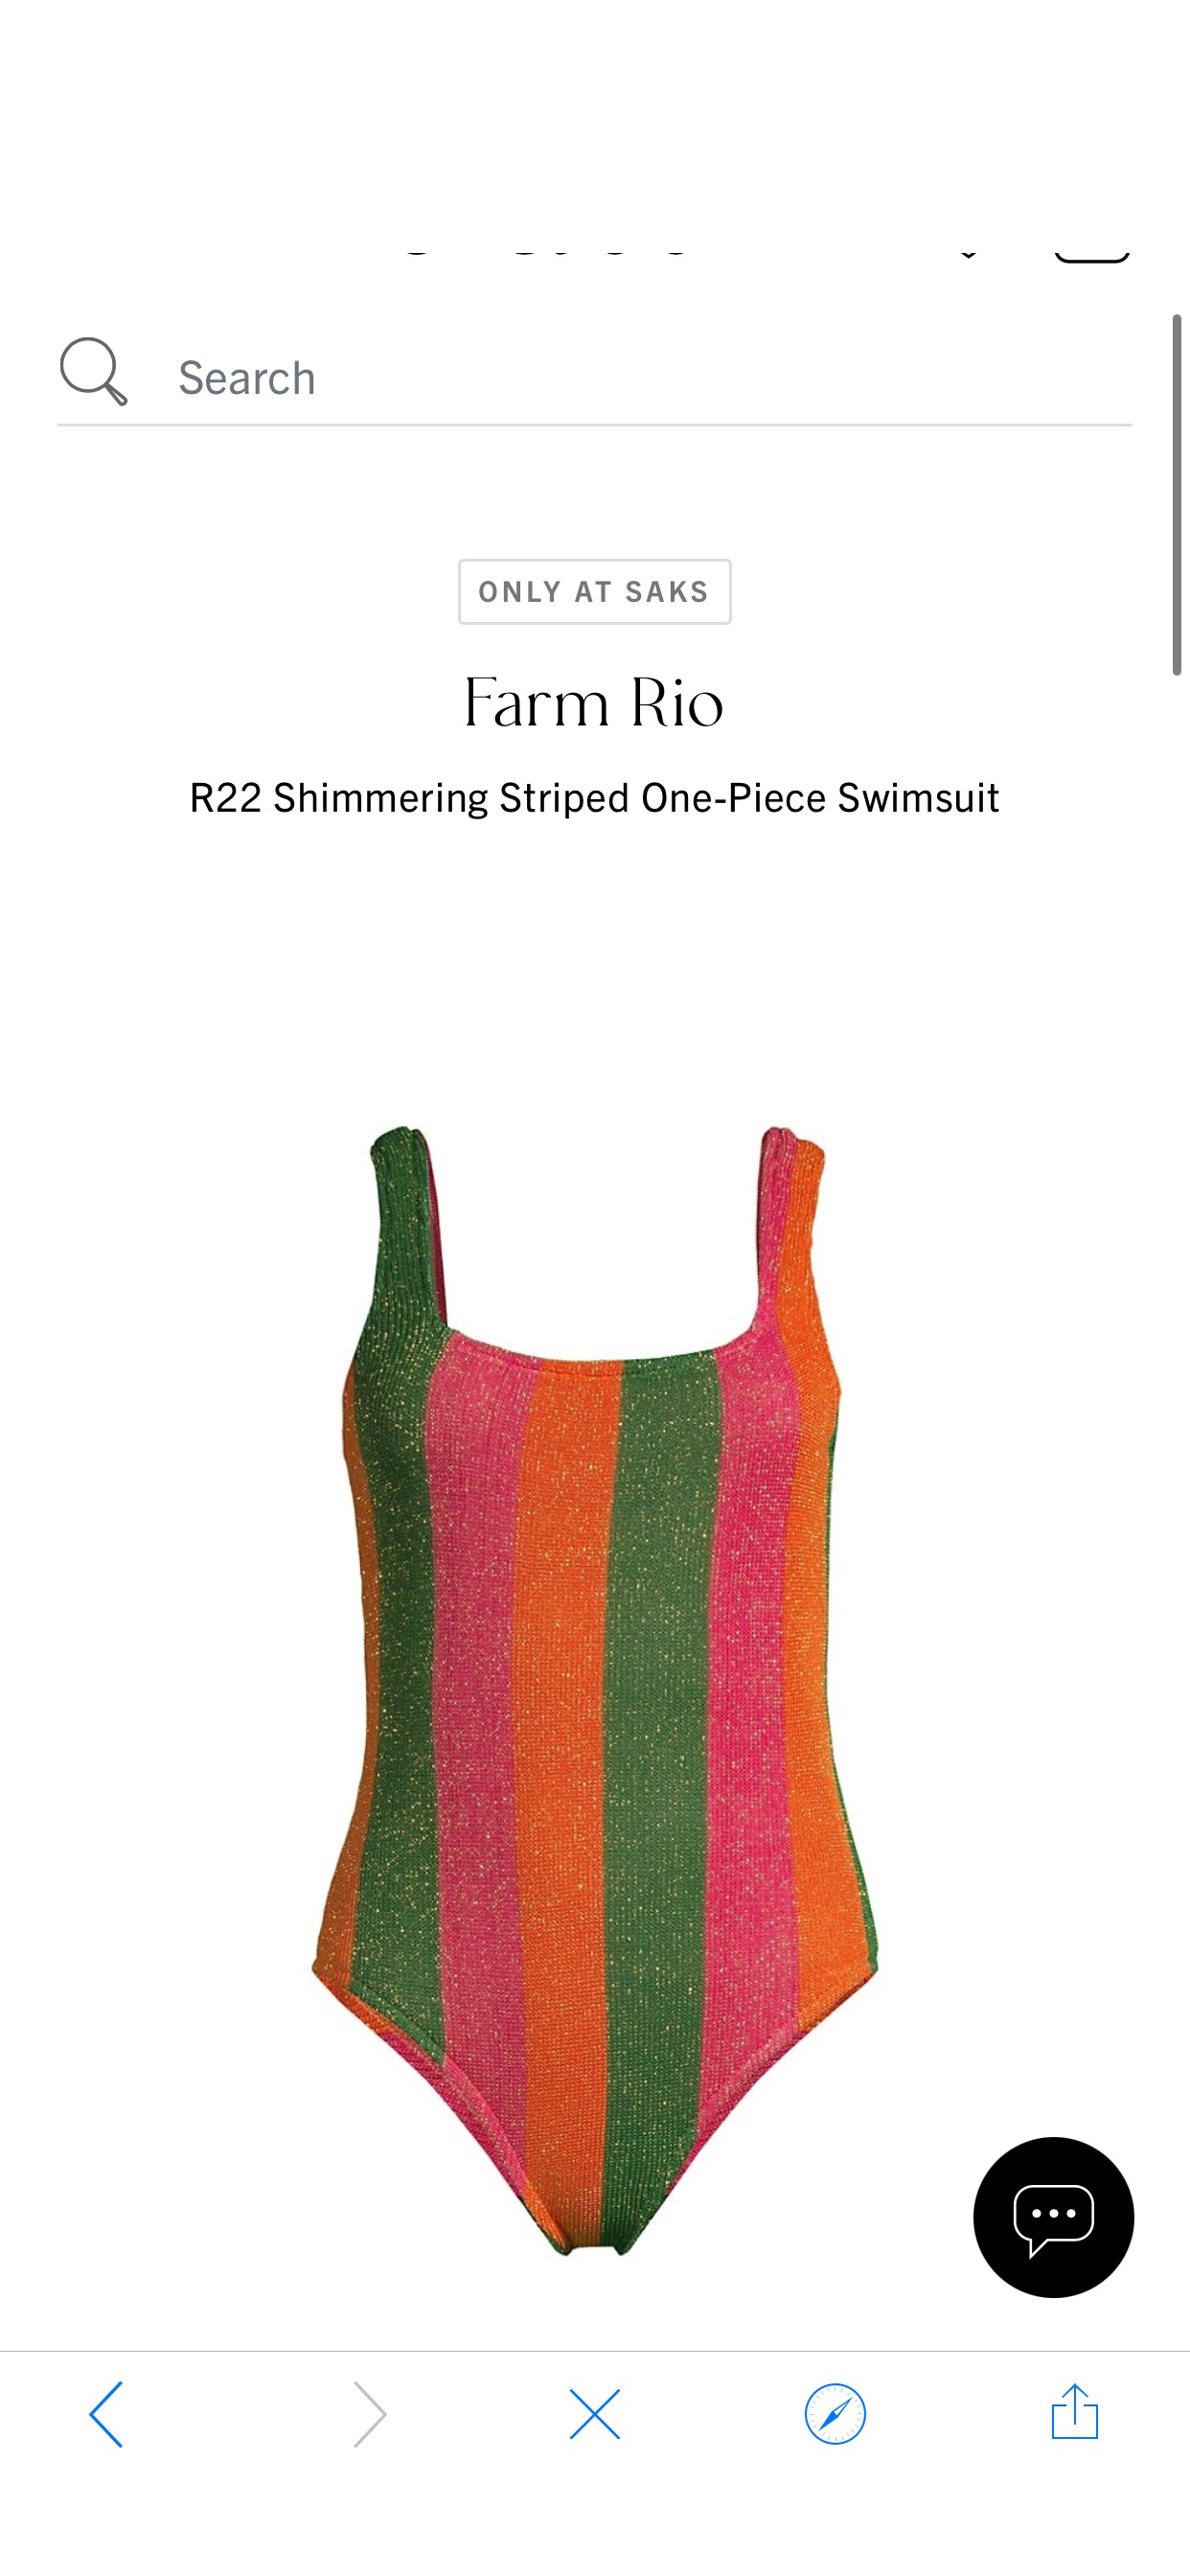 Shop Farm Rio R22 Shimmering Striped One-Piece Swimsuit | Saks Fifth Avenue
泳装